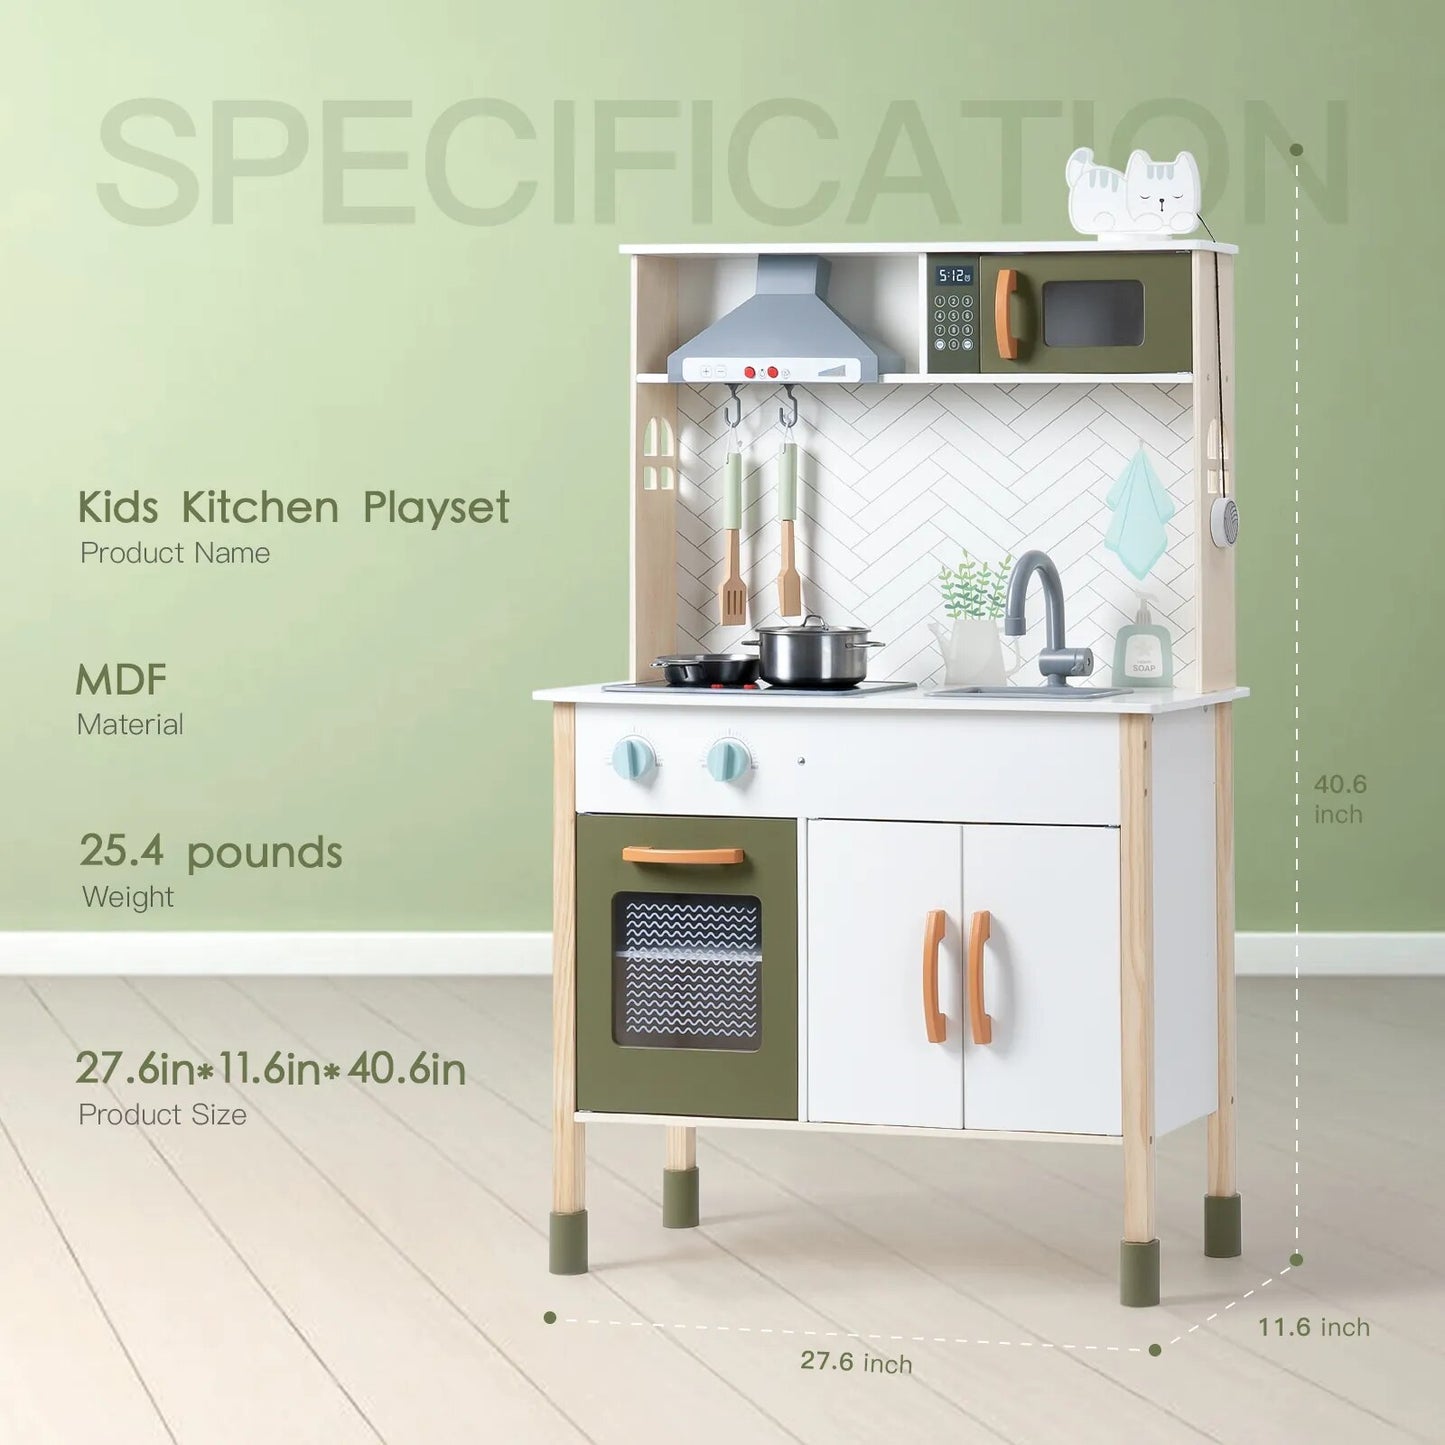 Wooden Pretend Play Kitchen Set for Kids Toddlers - Budget Friendly